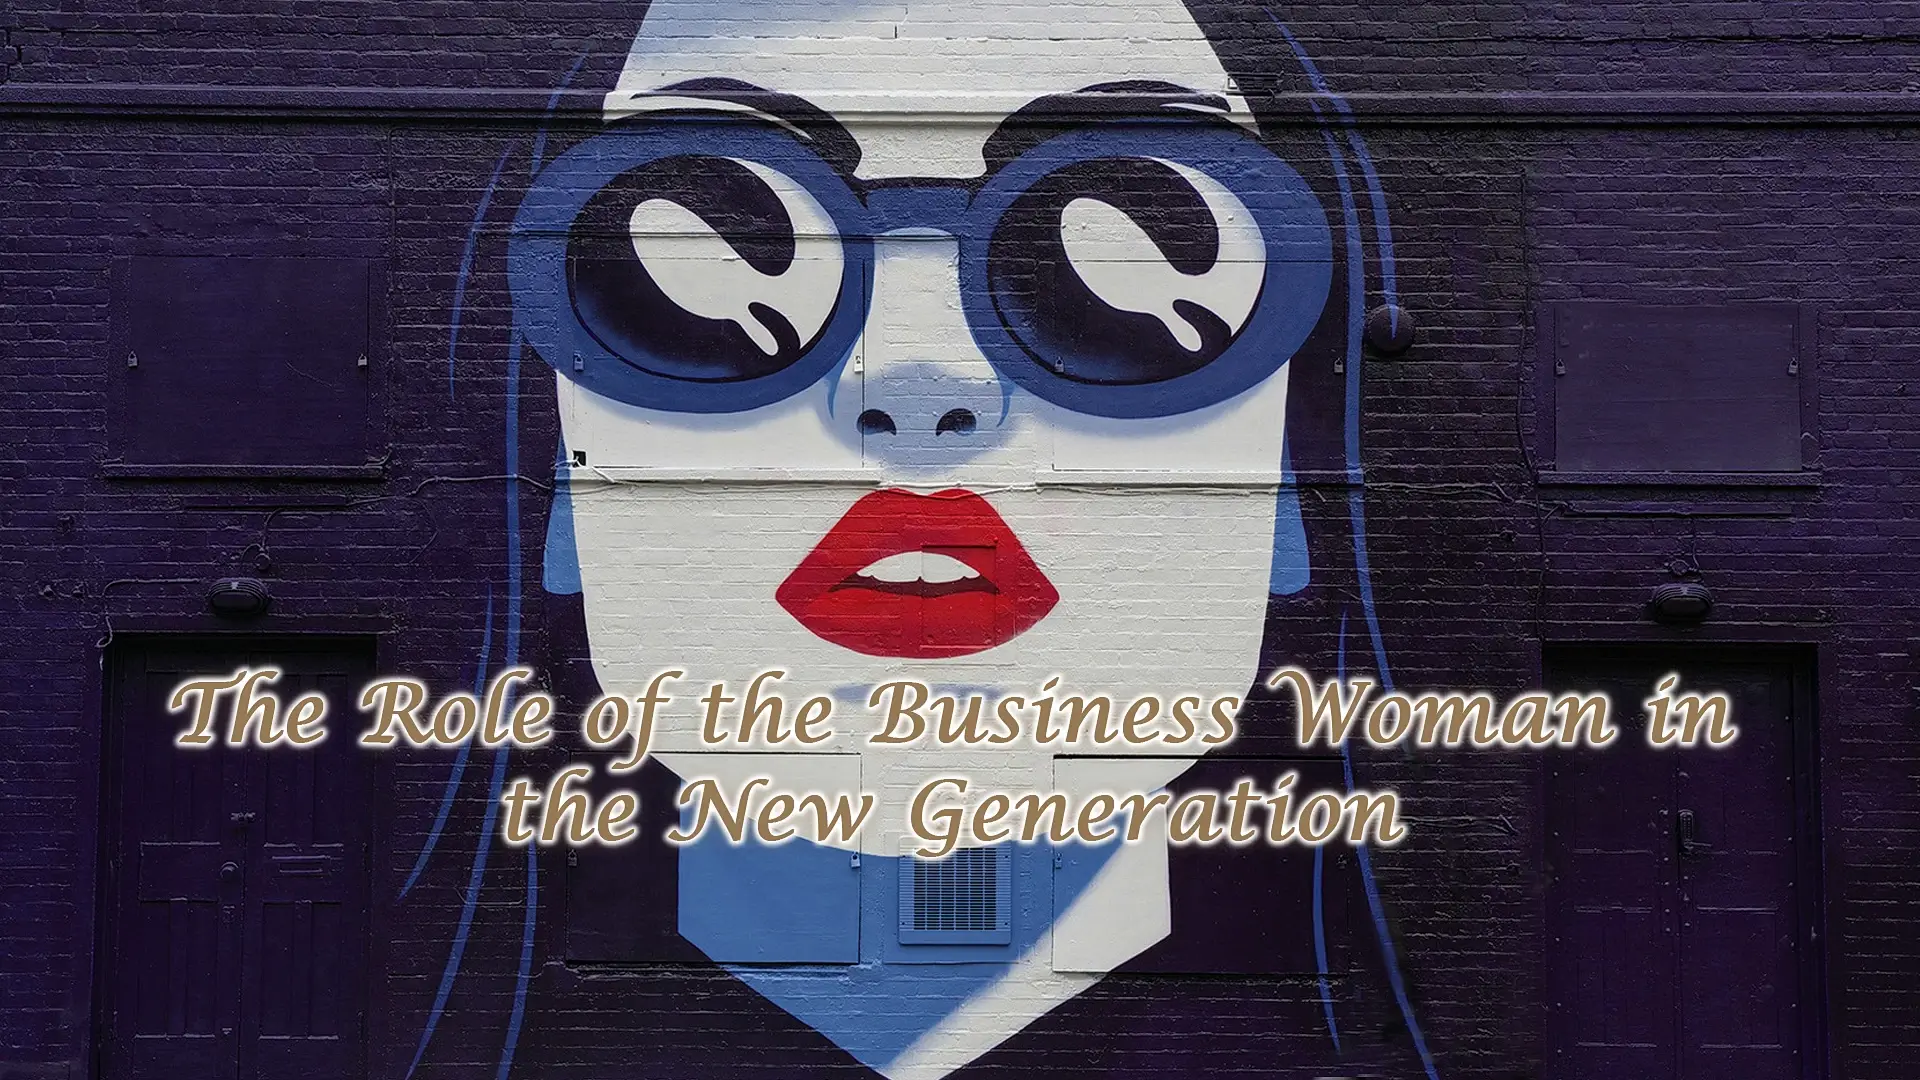 The Role of the Business Woman in the New Generation